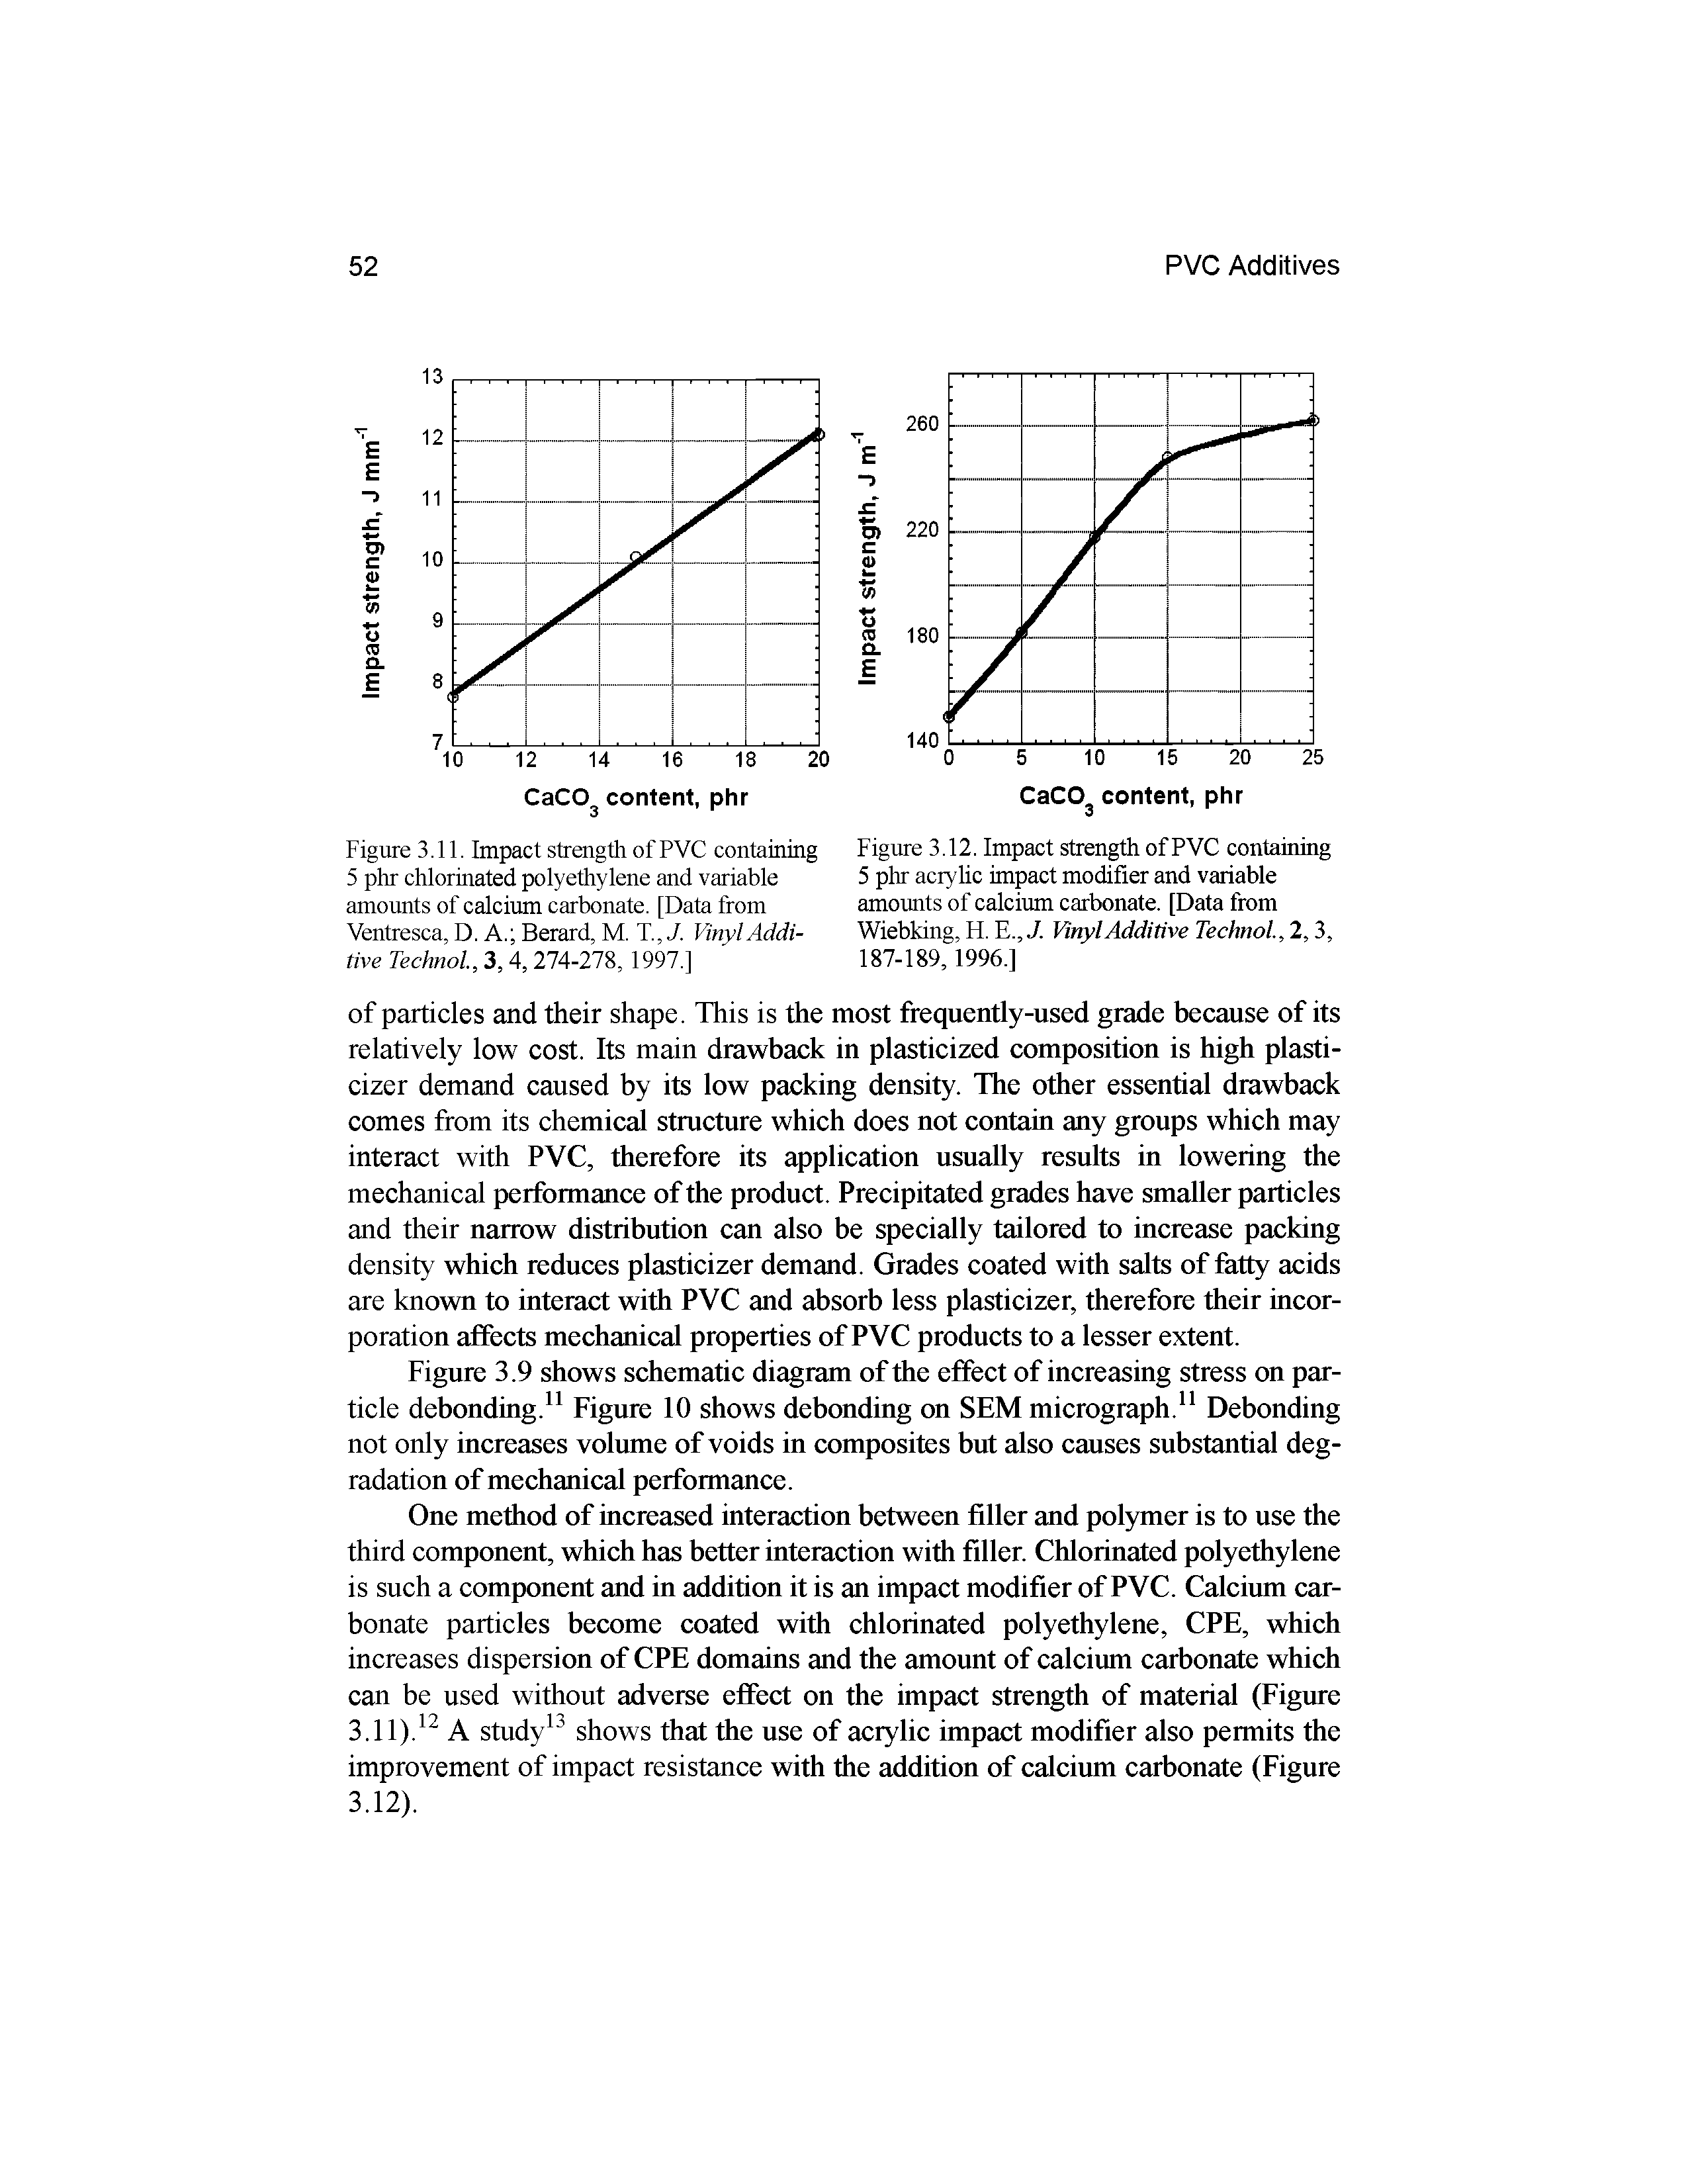 Figure 3.12. Impact strength of PVC containing 5 phr acrylic impact modifier and variable amounts of calcium carbonate. [Data from Wiebking, H. E., J. Vinyl Additive Technol,2,3, 187-189,1996.]...